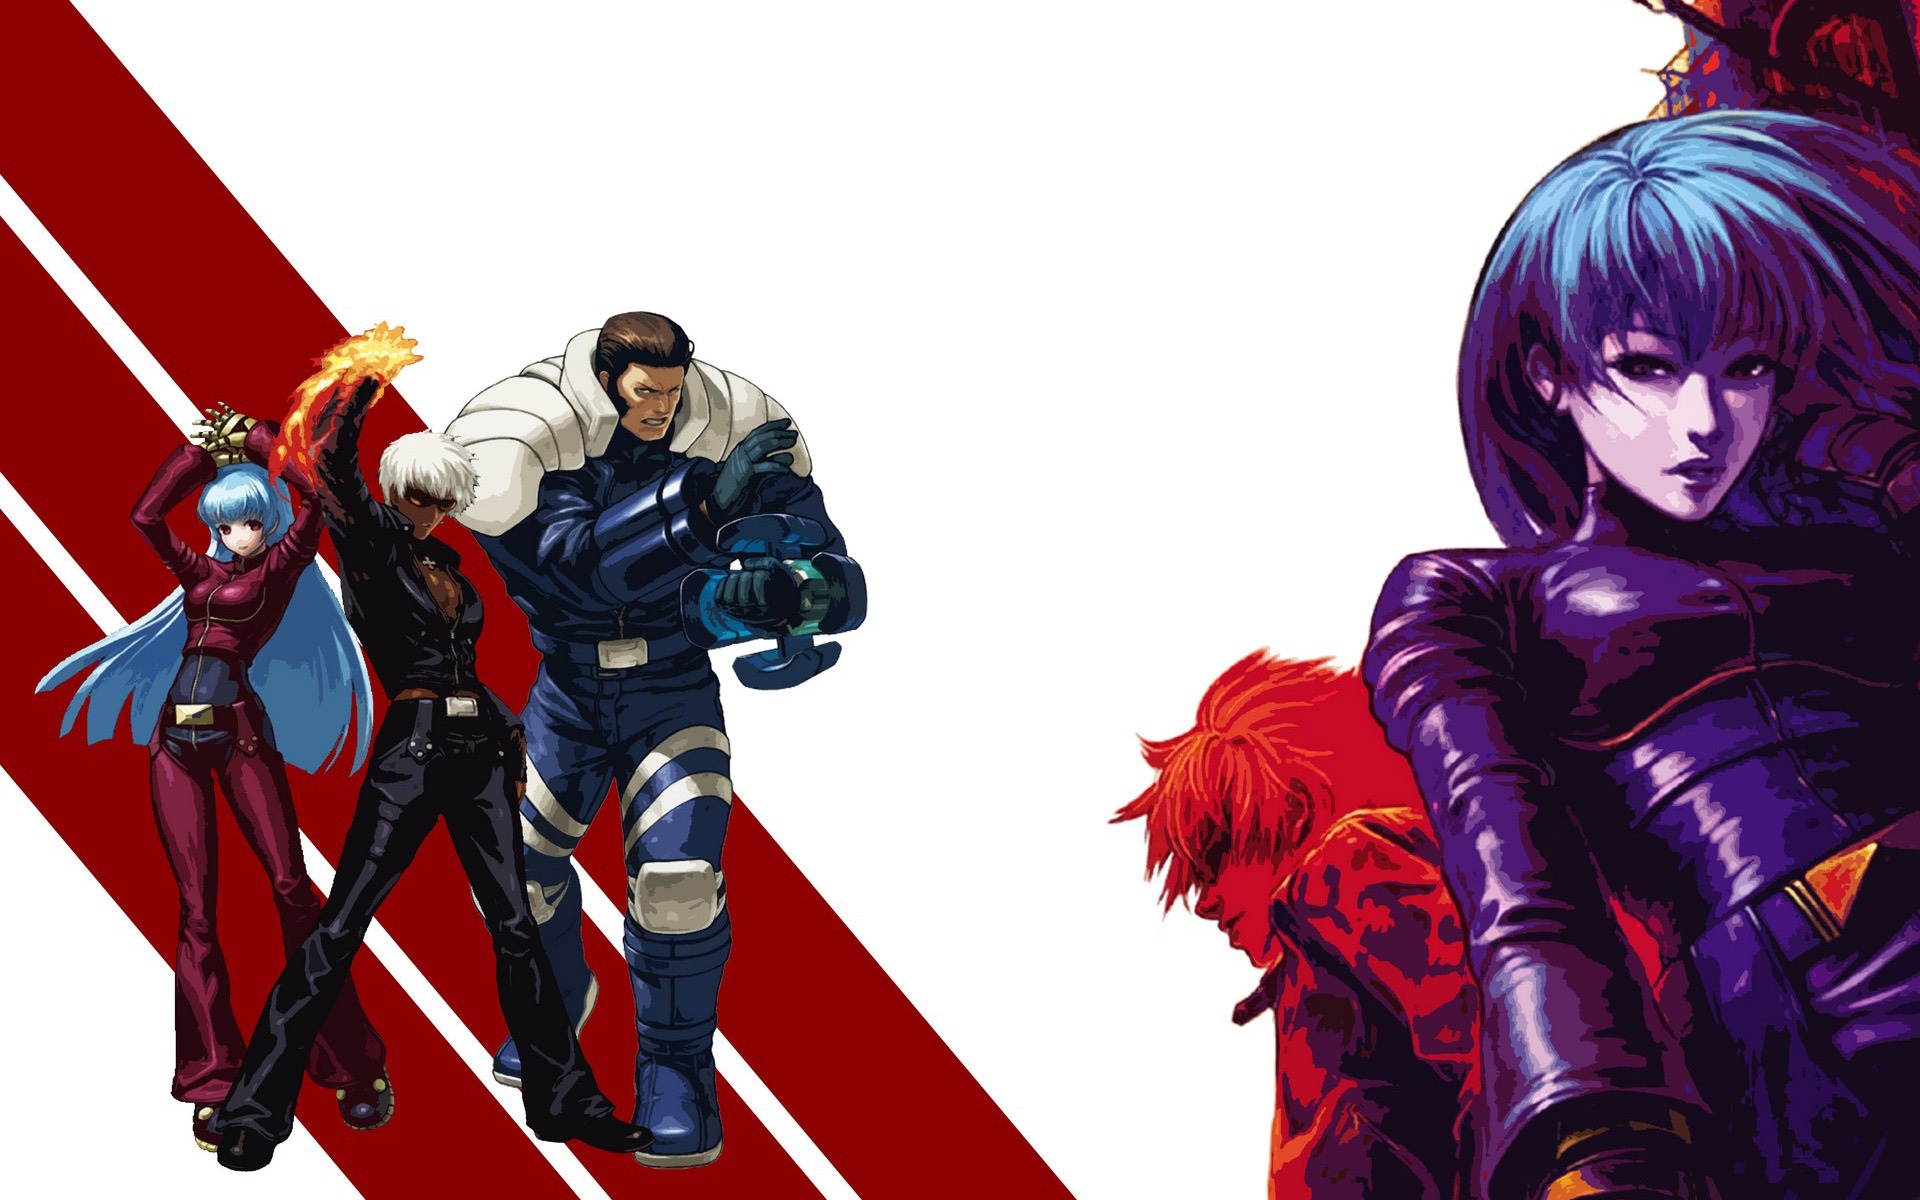 The King of Fighters XIII wallpapers #5 - 1920x1200